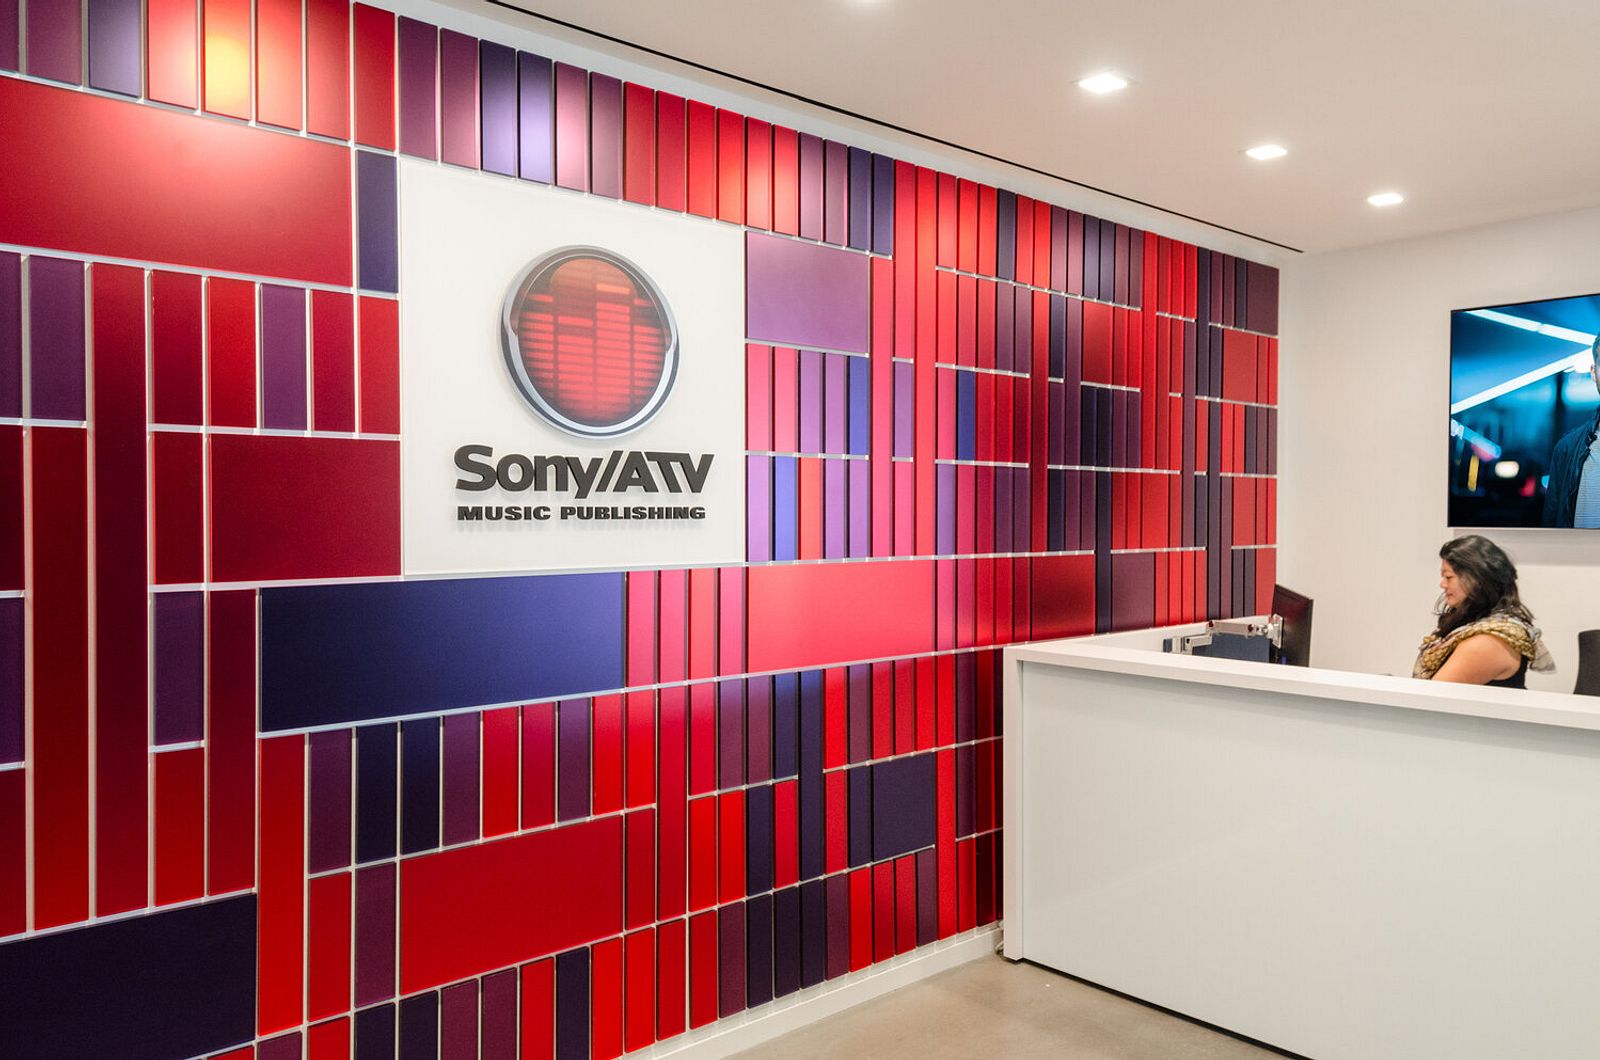 An interior wall made up of blue and different shades of red panels of various sizes with a logo in the center and a women sitting behind a white receptionist desk to the right.